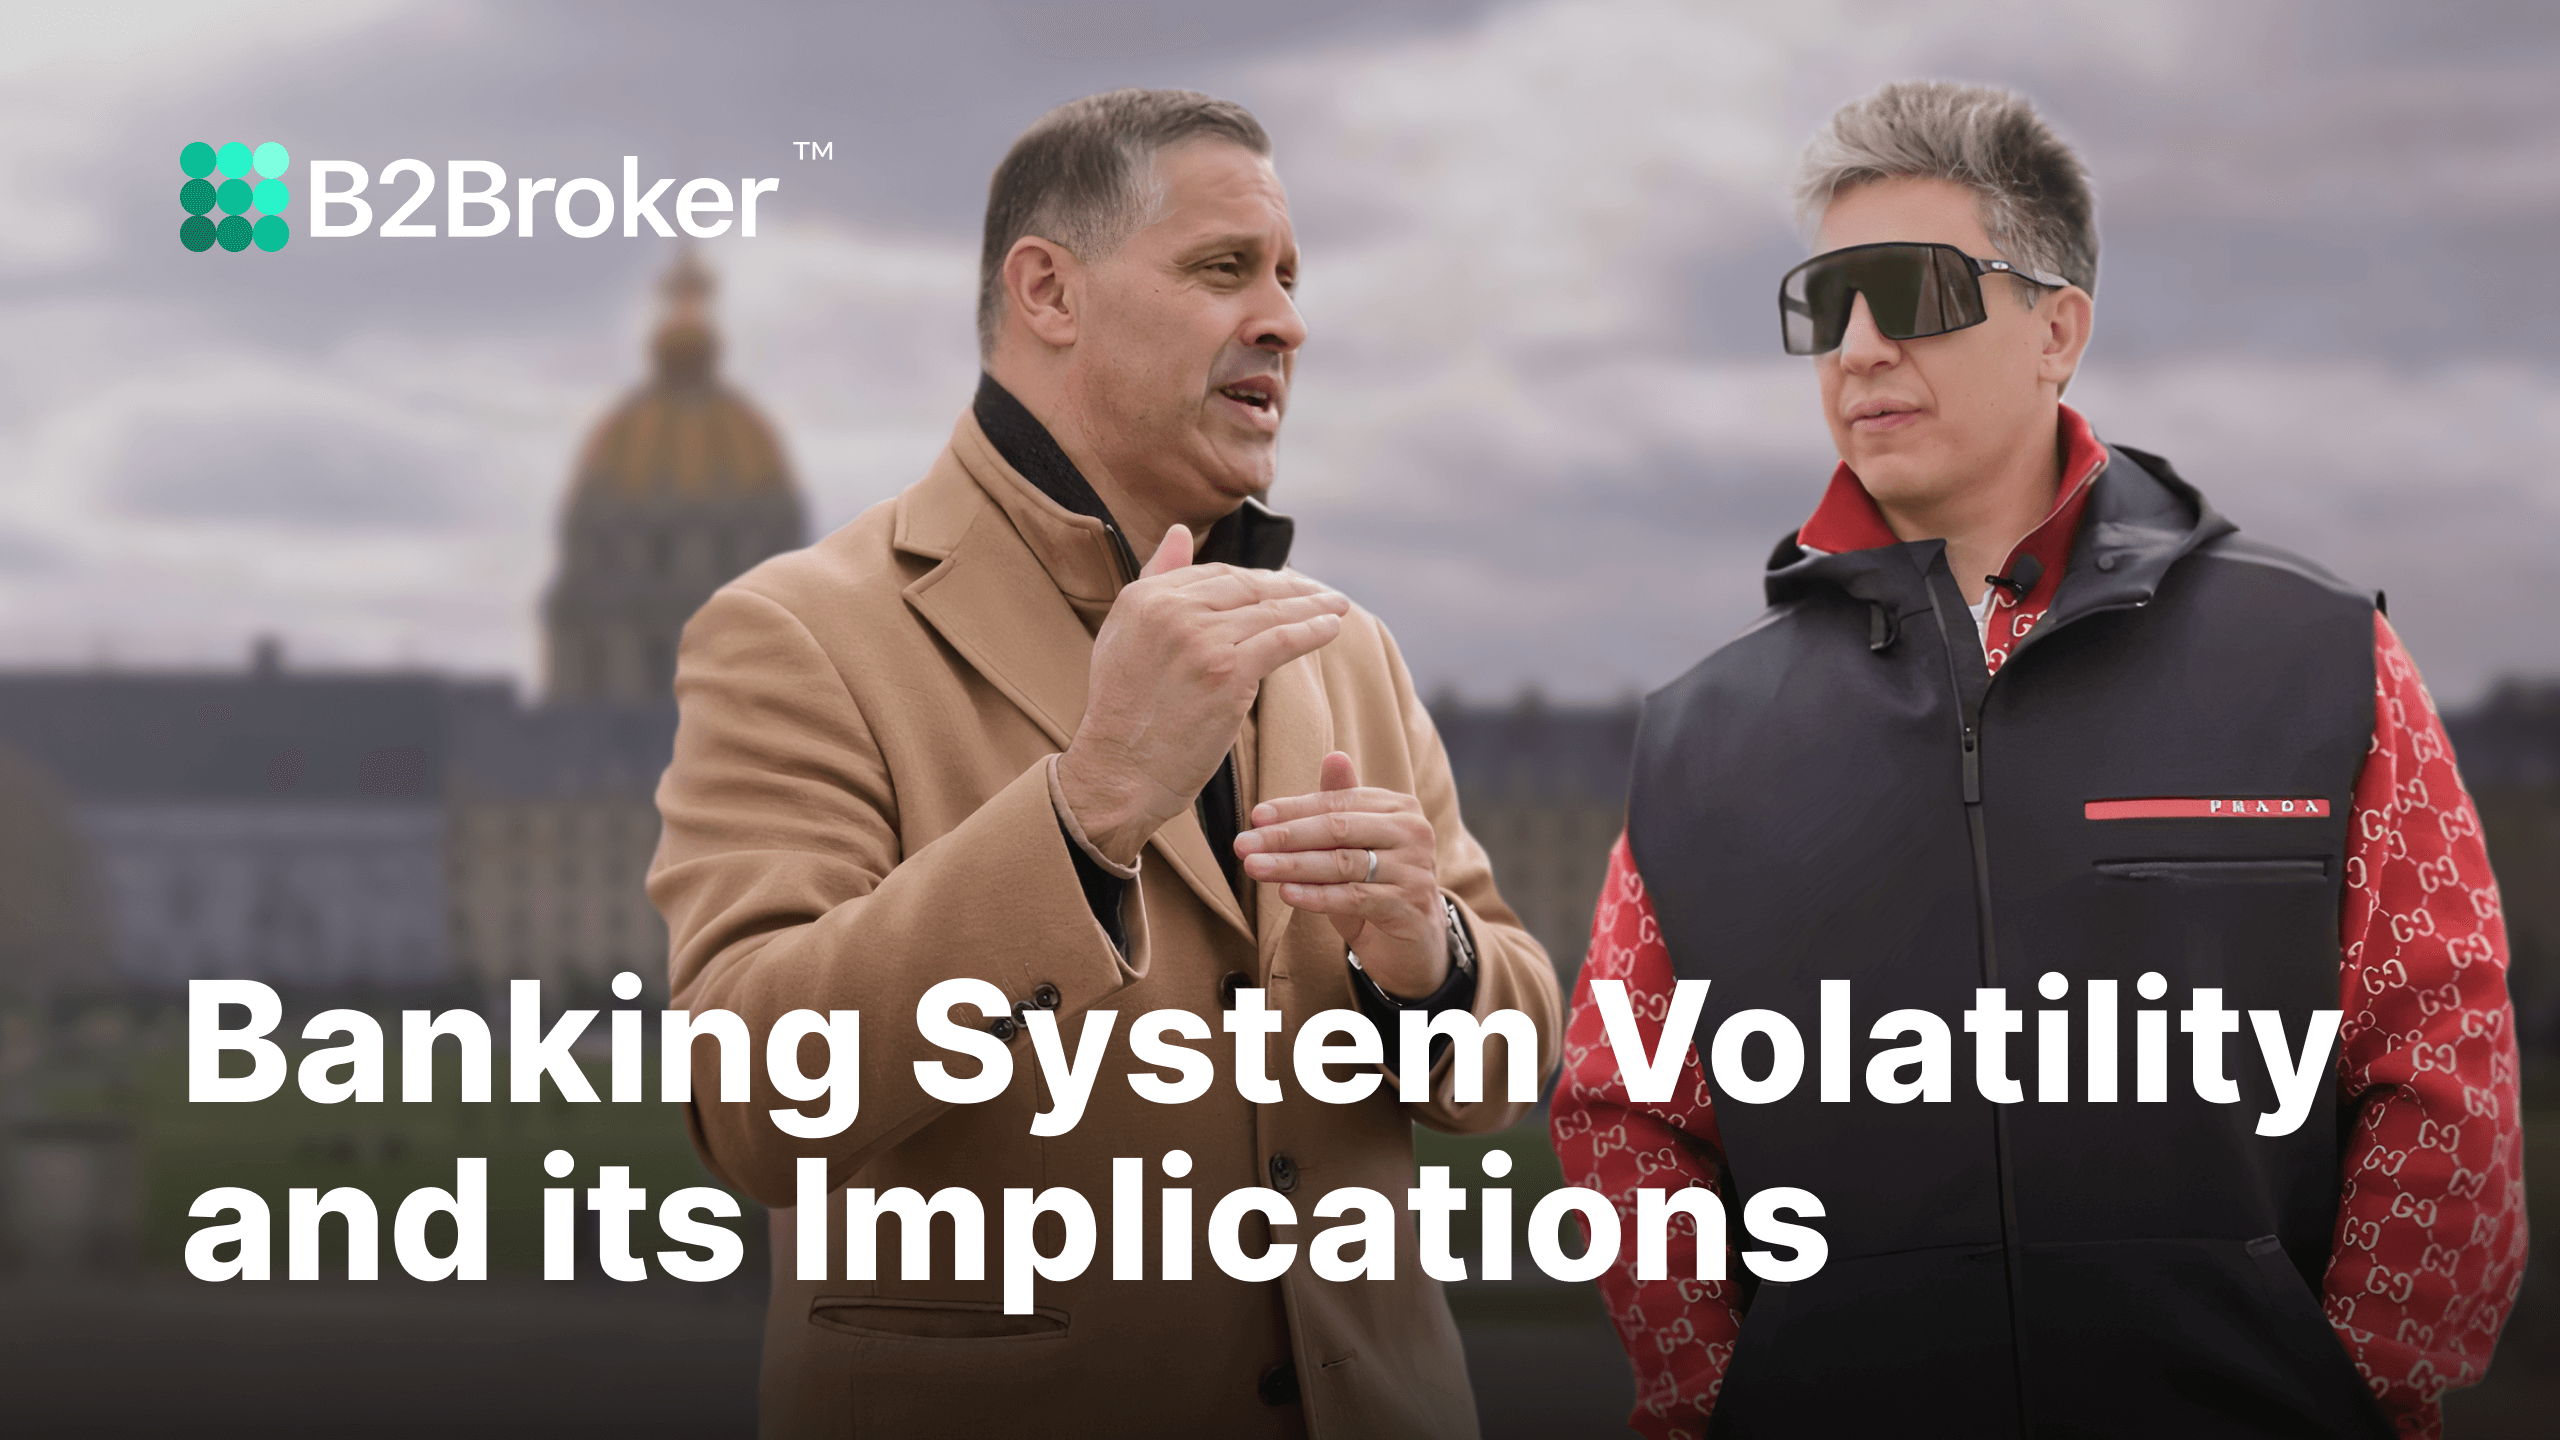 B2Broker Q&A | Banking System Volatility and Its Implications